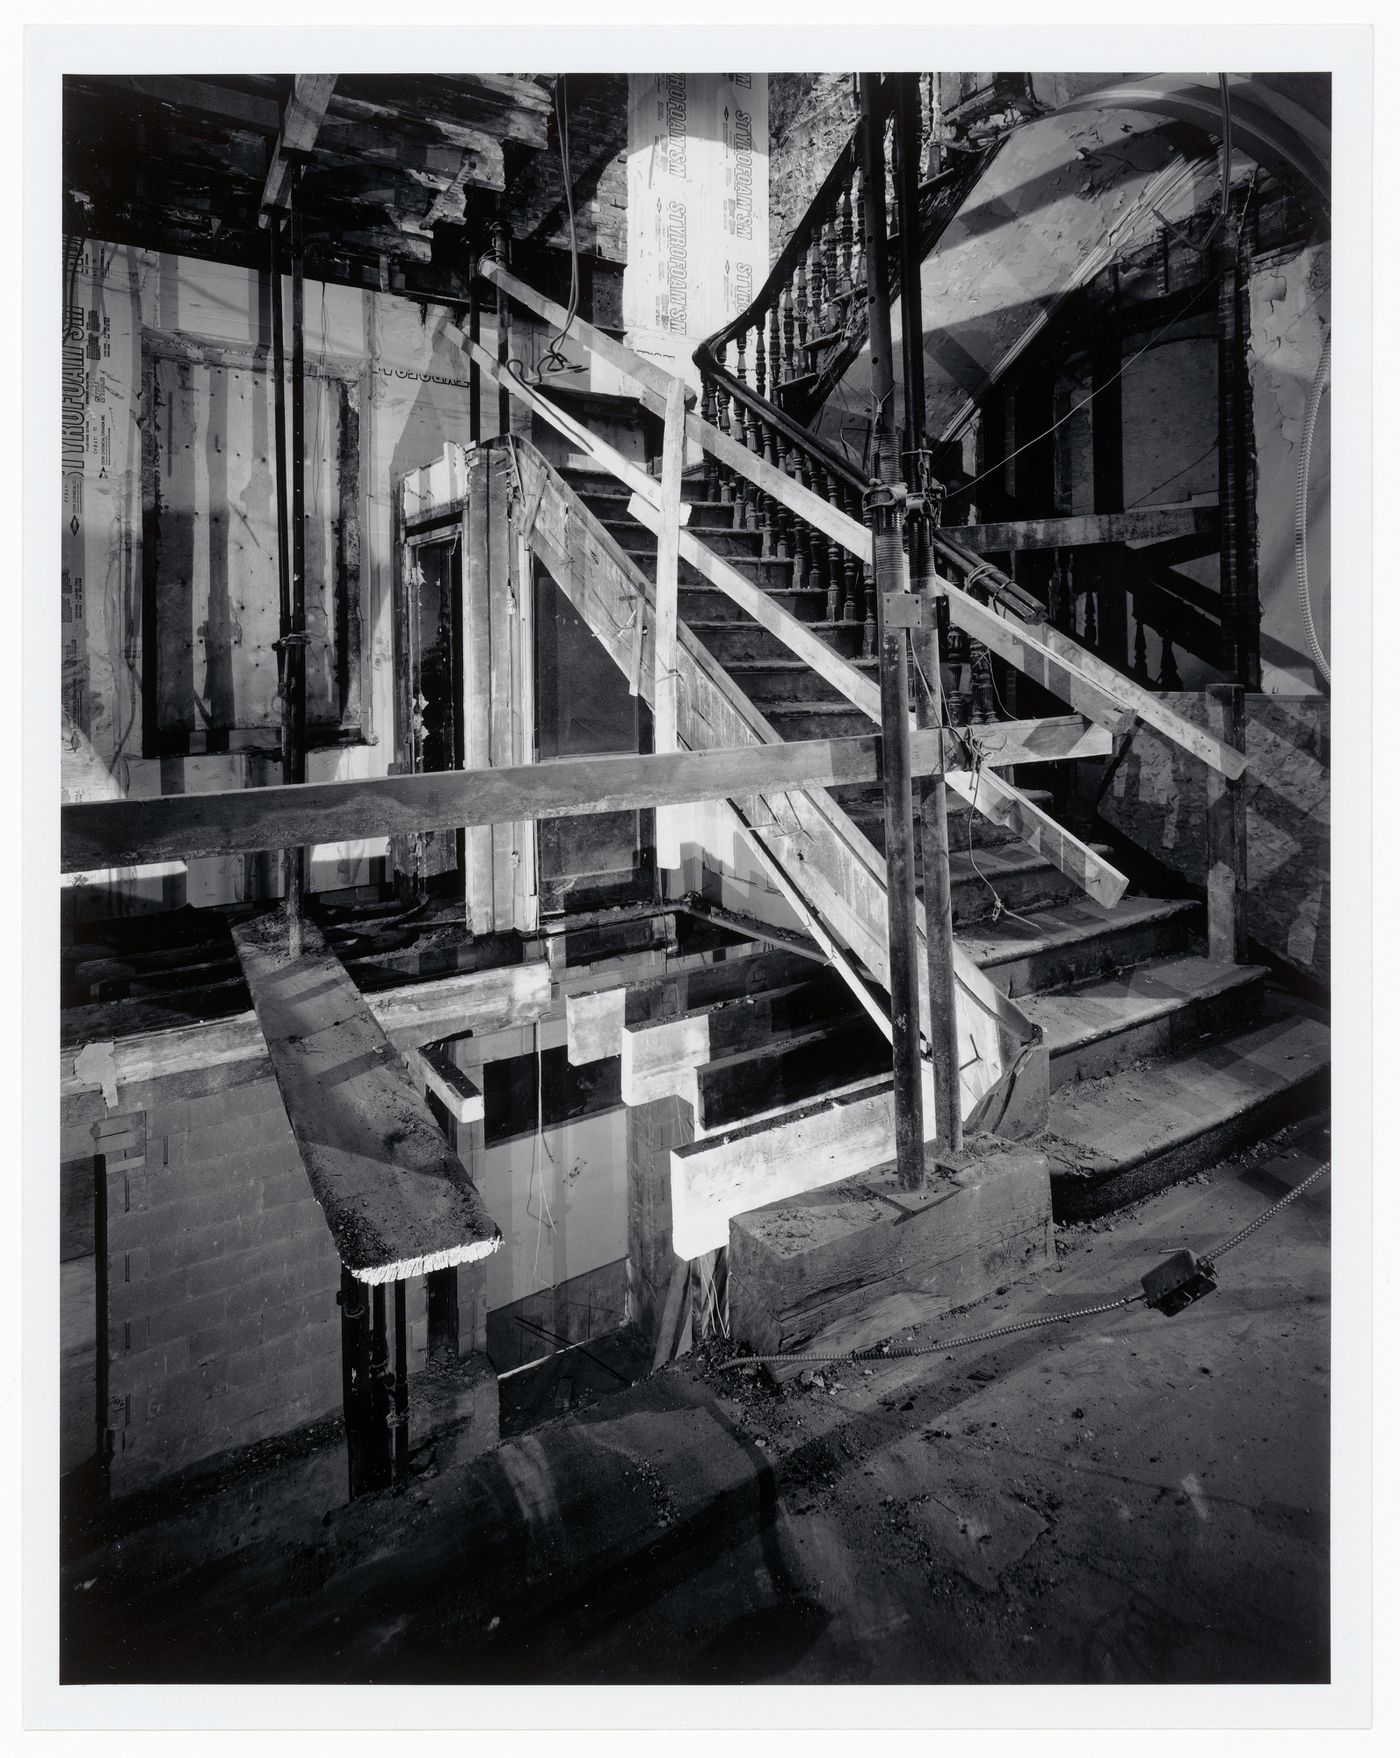 Interior view of the original carved wooden stairs surrounded by temporary construction framework, Shaughnessy House under renovation, Montréal, Québec